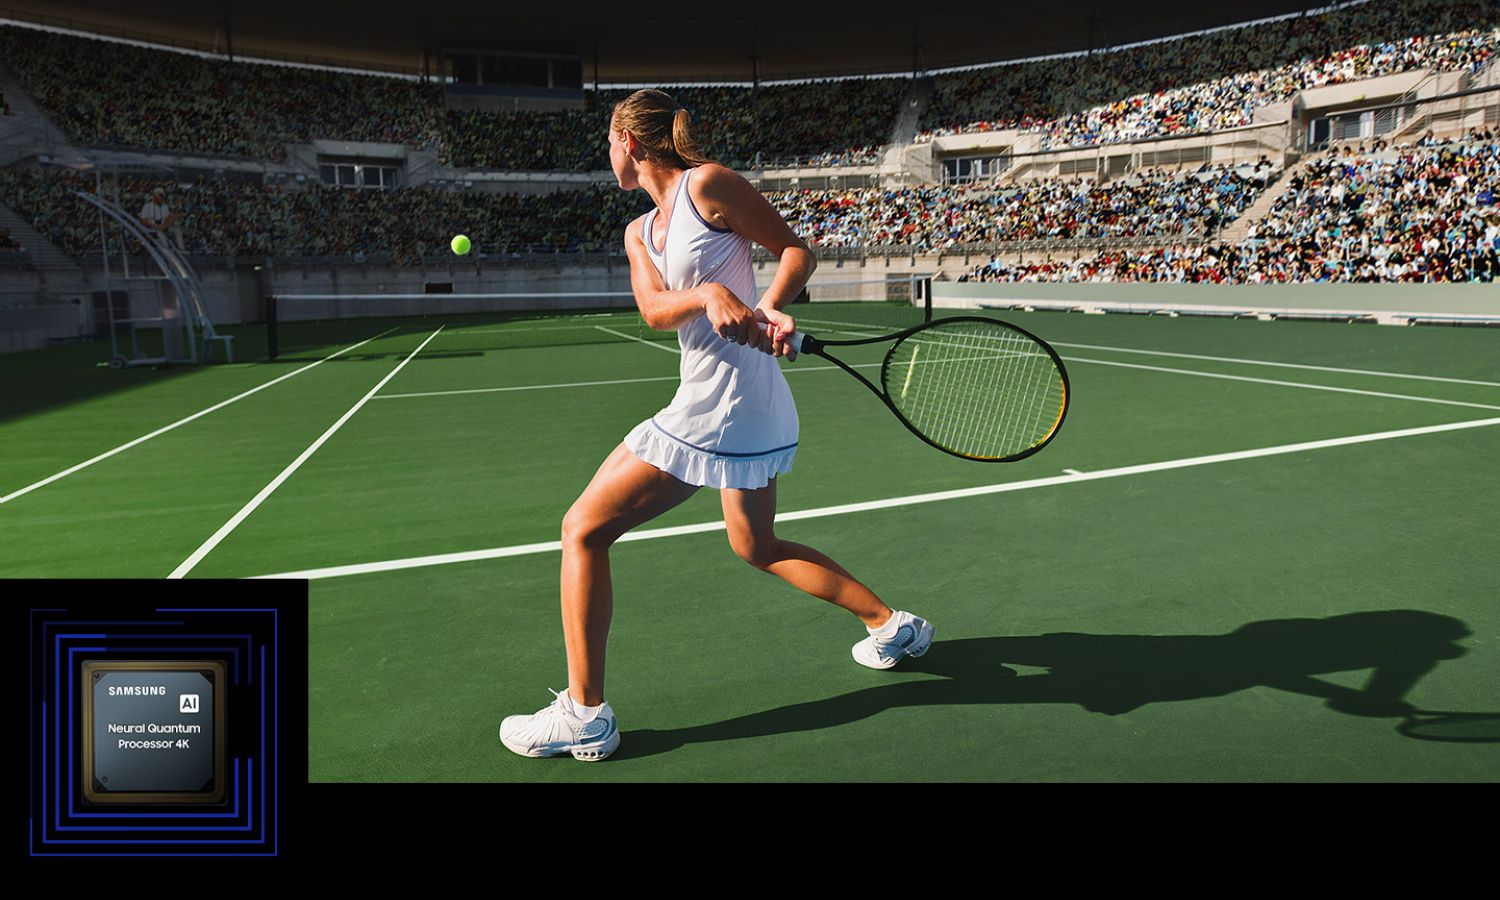 Female tennis player about to hit a ball